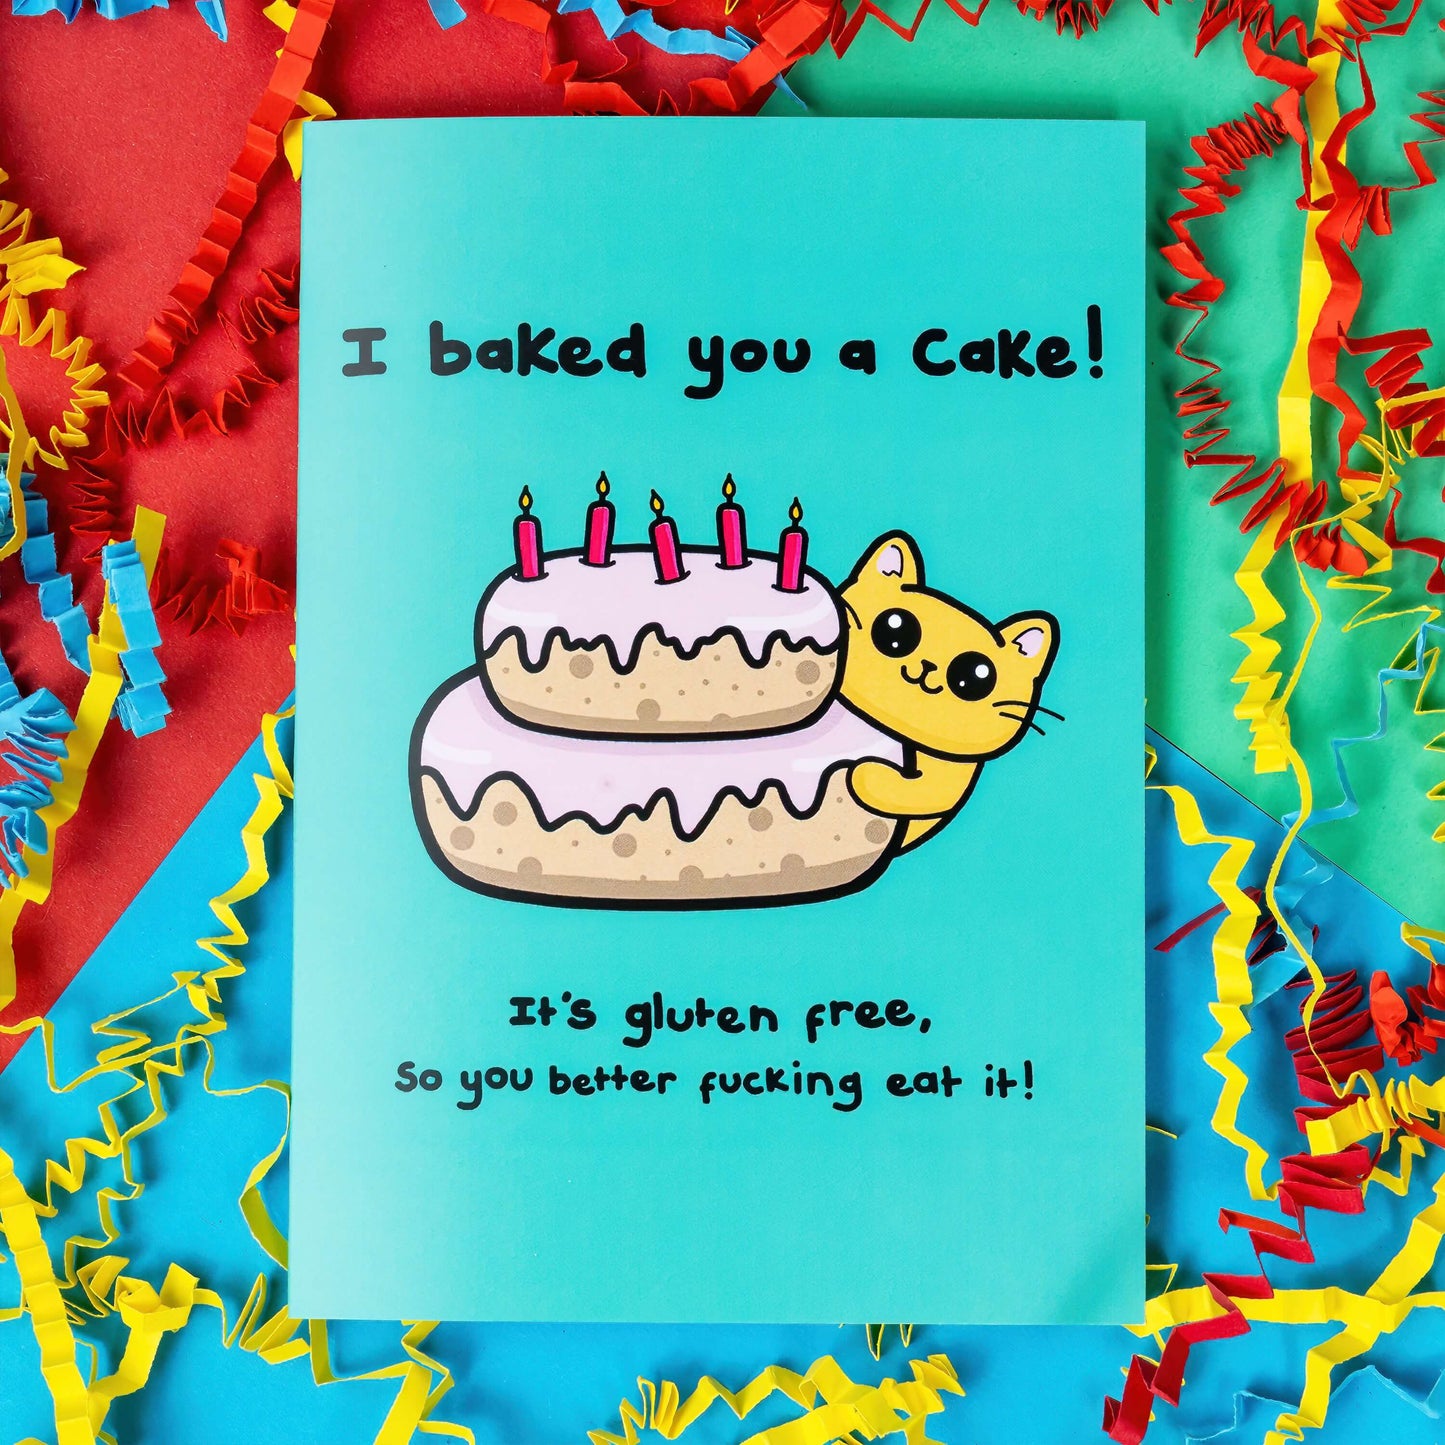 A turquoise blue card that has a drawing of a yellow cat poking around a pink layered cake with candles in the top. Text on the card says I baked you a cake! It's gluten free, so you better fucking eat it! The a6 cat themed birthday card is on a blue, red and green background with red, yellow and blue crinkle card confetti. 